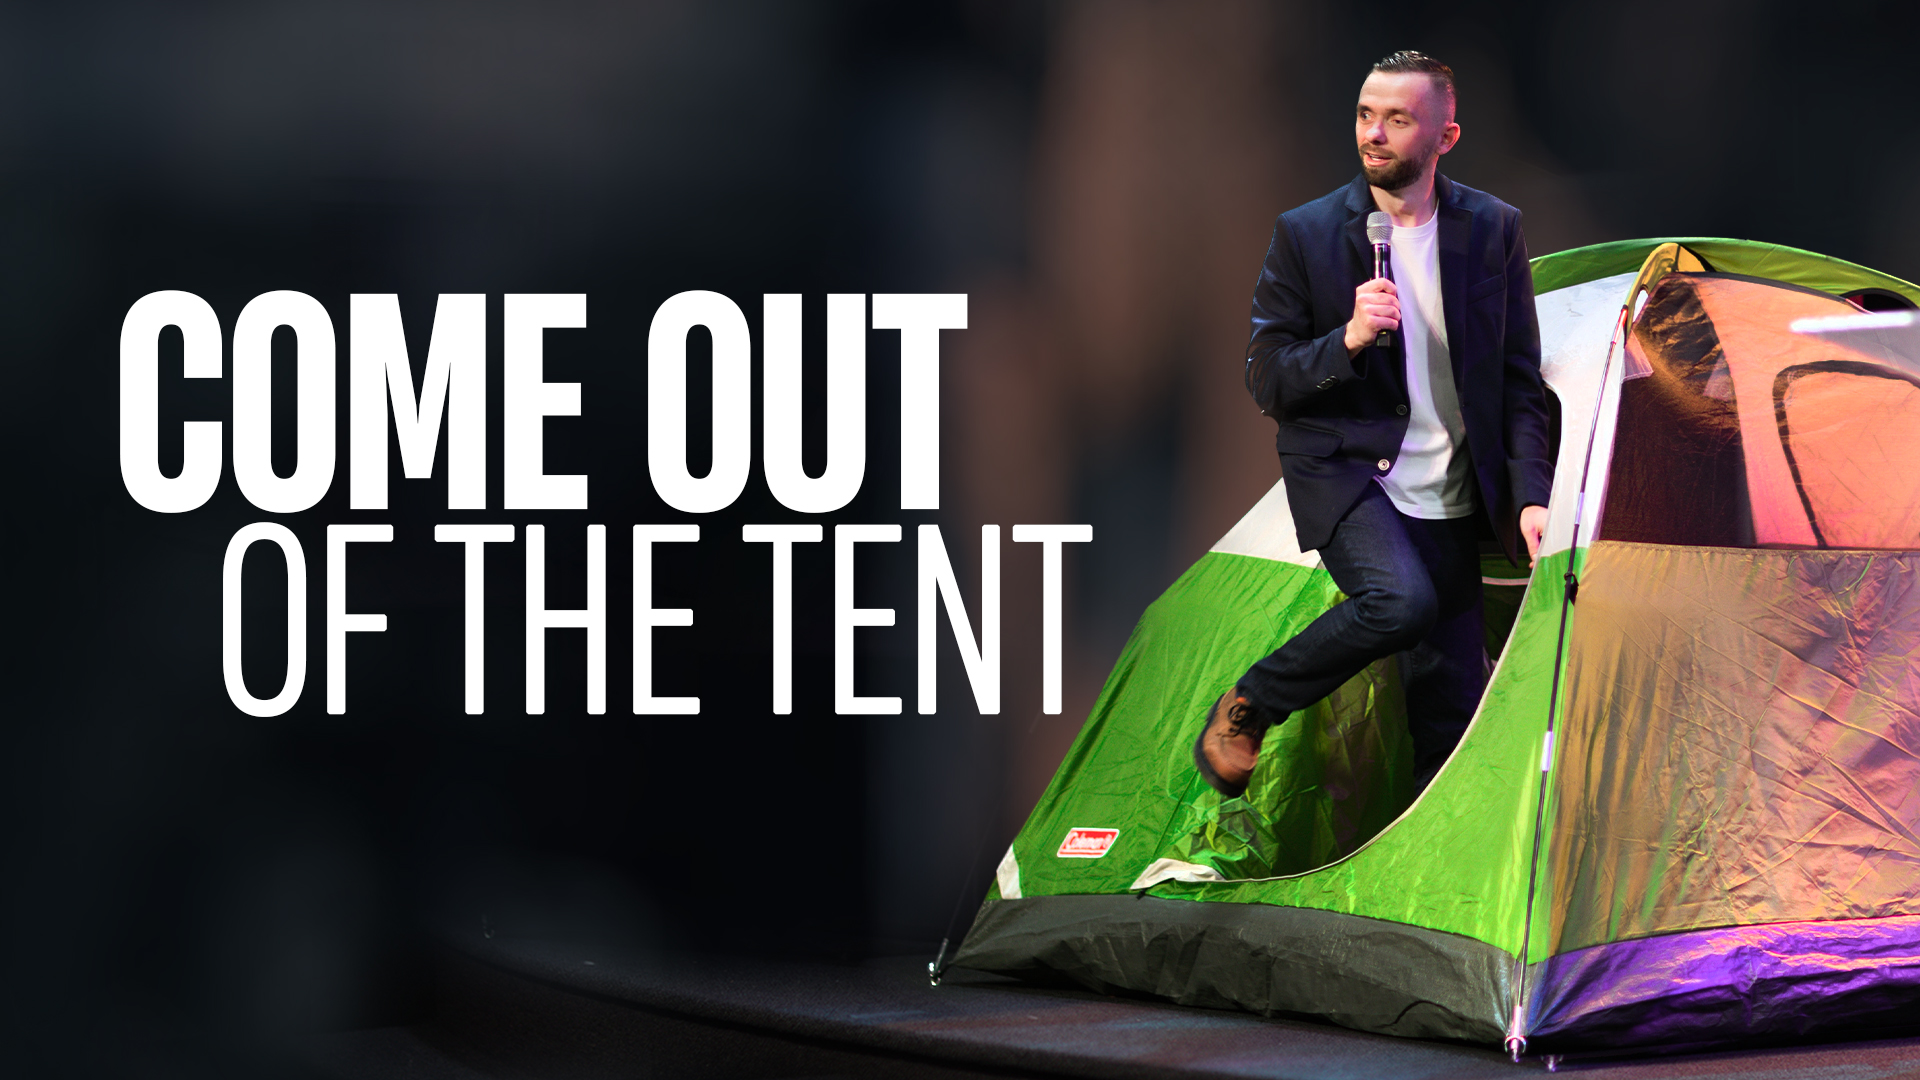 Featured Image for “Come Out of The Tent”